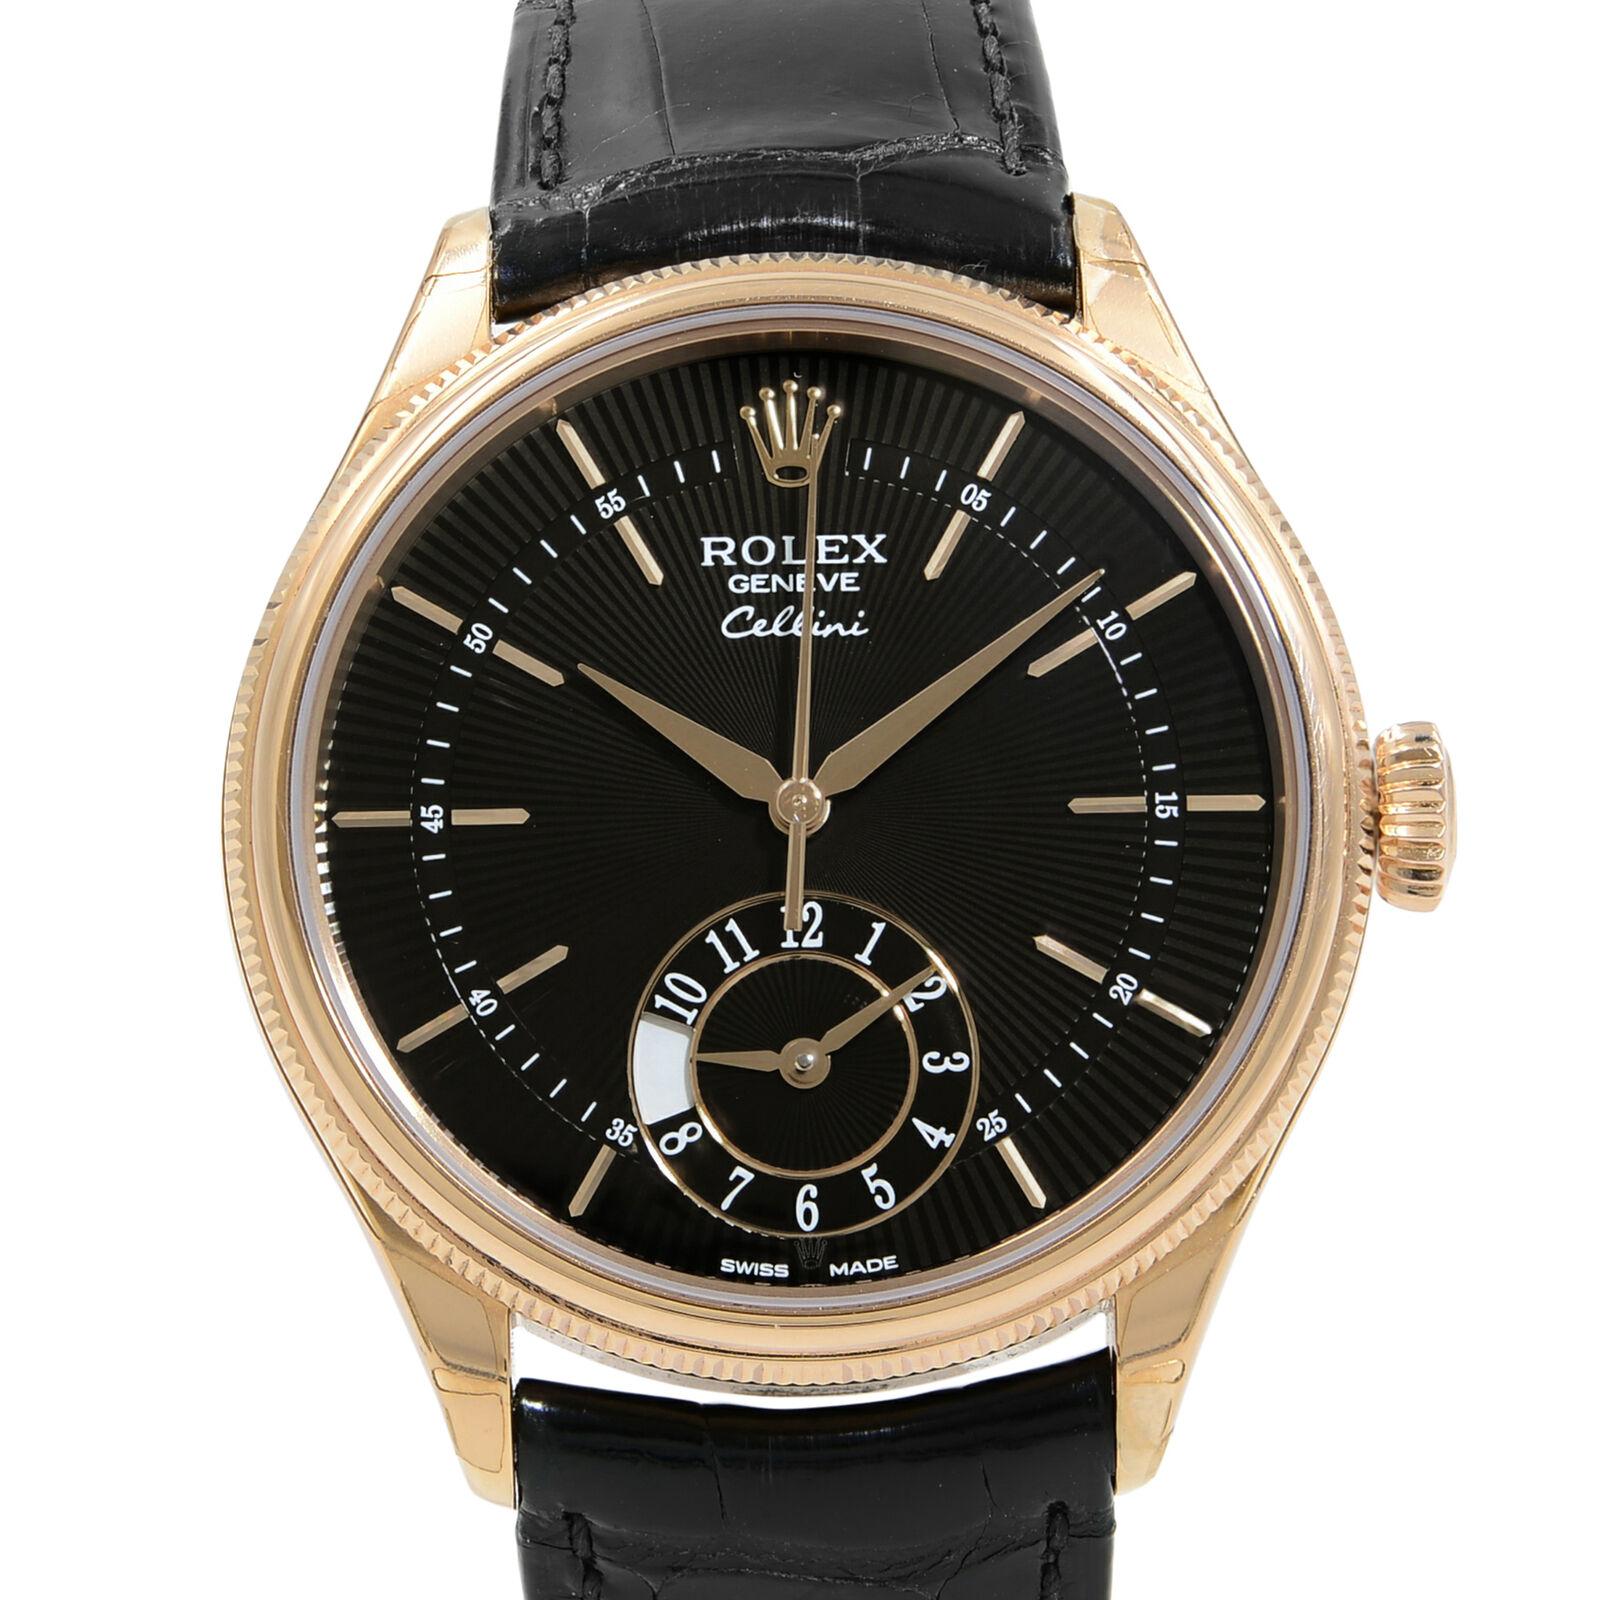 Brand	Rolex
Series	Cellini
Model Number	50525
Serial	Scrambled
Reference Number	
Movement	Automatic Self Wind
Gender	Mens
Case Material	Rose Gold
Case Shape	Round
Case Diameter w/ crown	42mm
Case Diameter	39mm
Bezel Diameter	38.5mm
Case